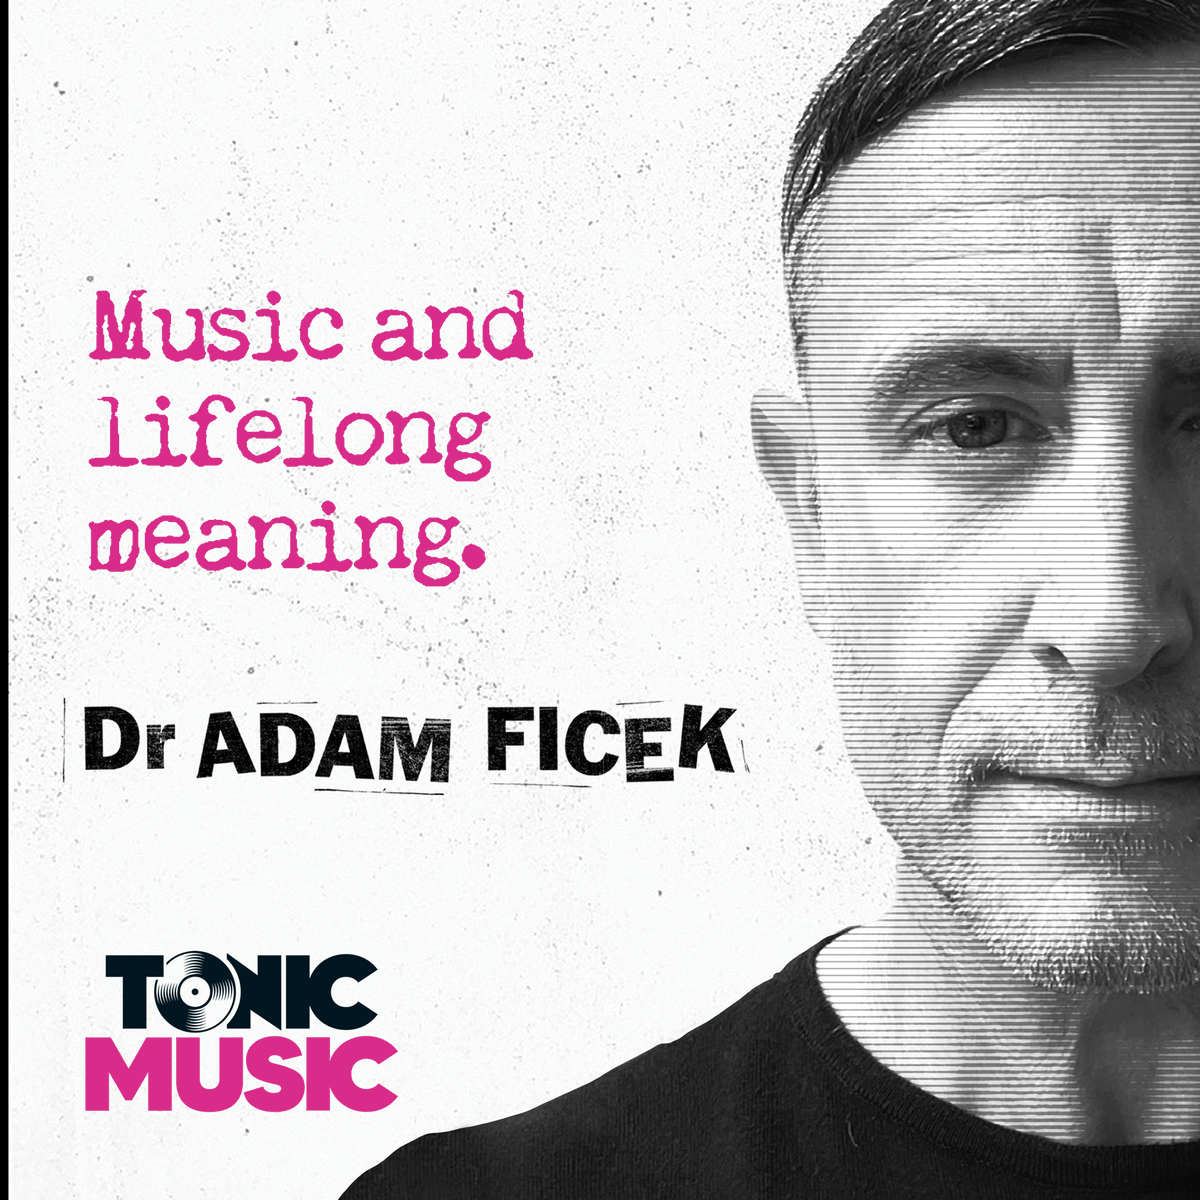 Check out the series of weekly blogs on music, touring and addiction written by @adamficek on the Tonic Music website. This week's is on 'Music and lifelong meaning'.
→ tonicmusic.co.uk/post/afbl41
#MentalHealth #Music #Tonic
#NeverMindTheStigma
#TonicRider #Wellbeing